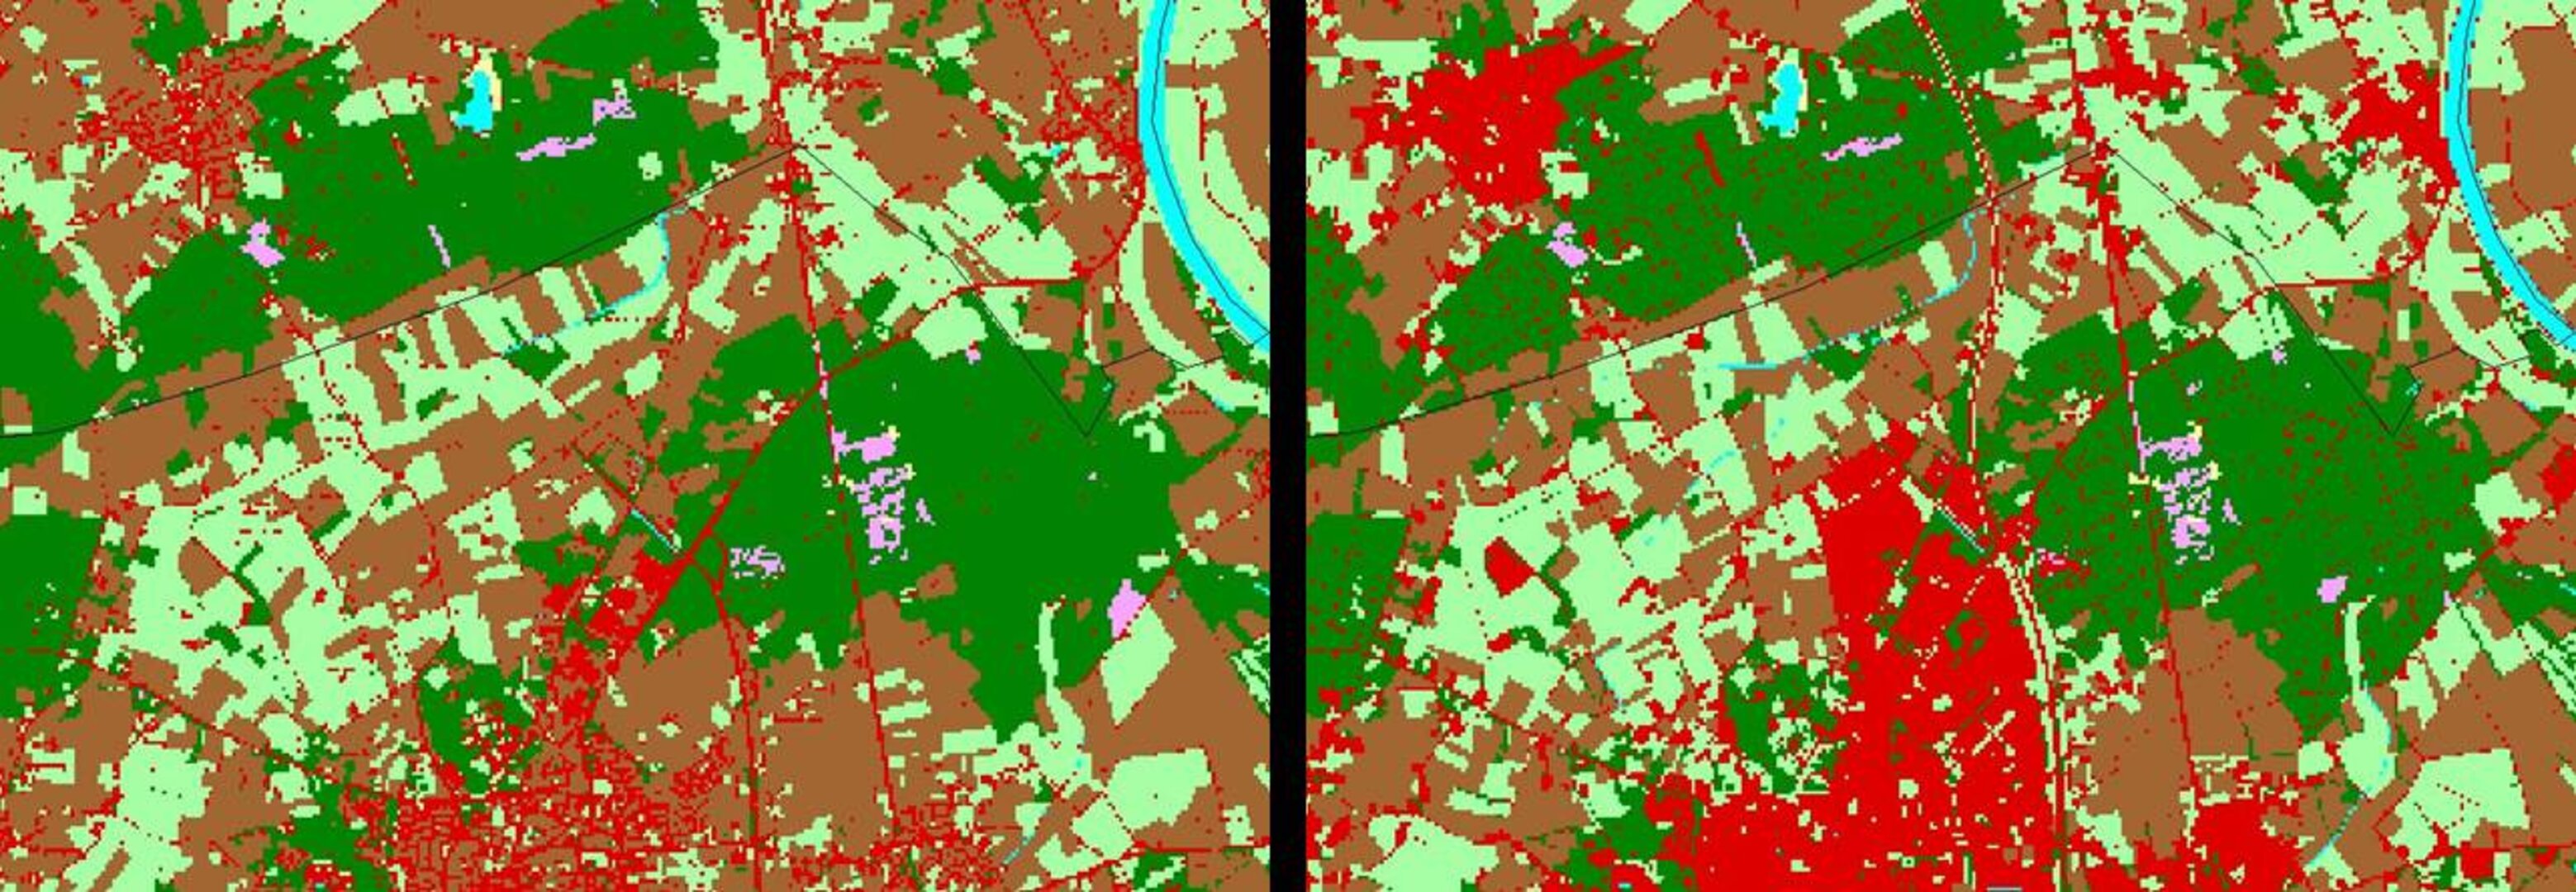 Land use change in the Netherlands